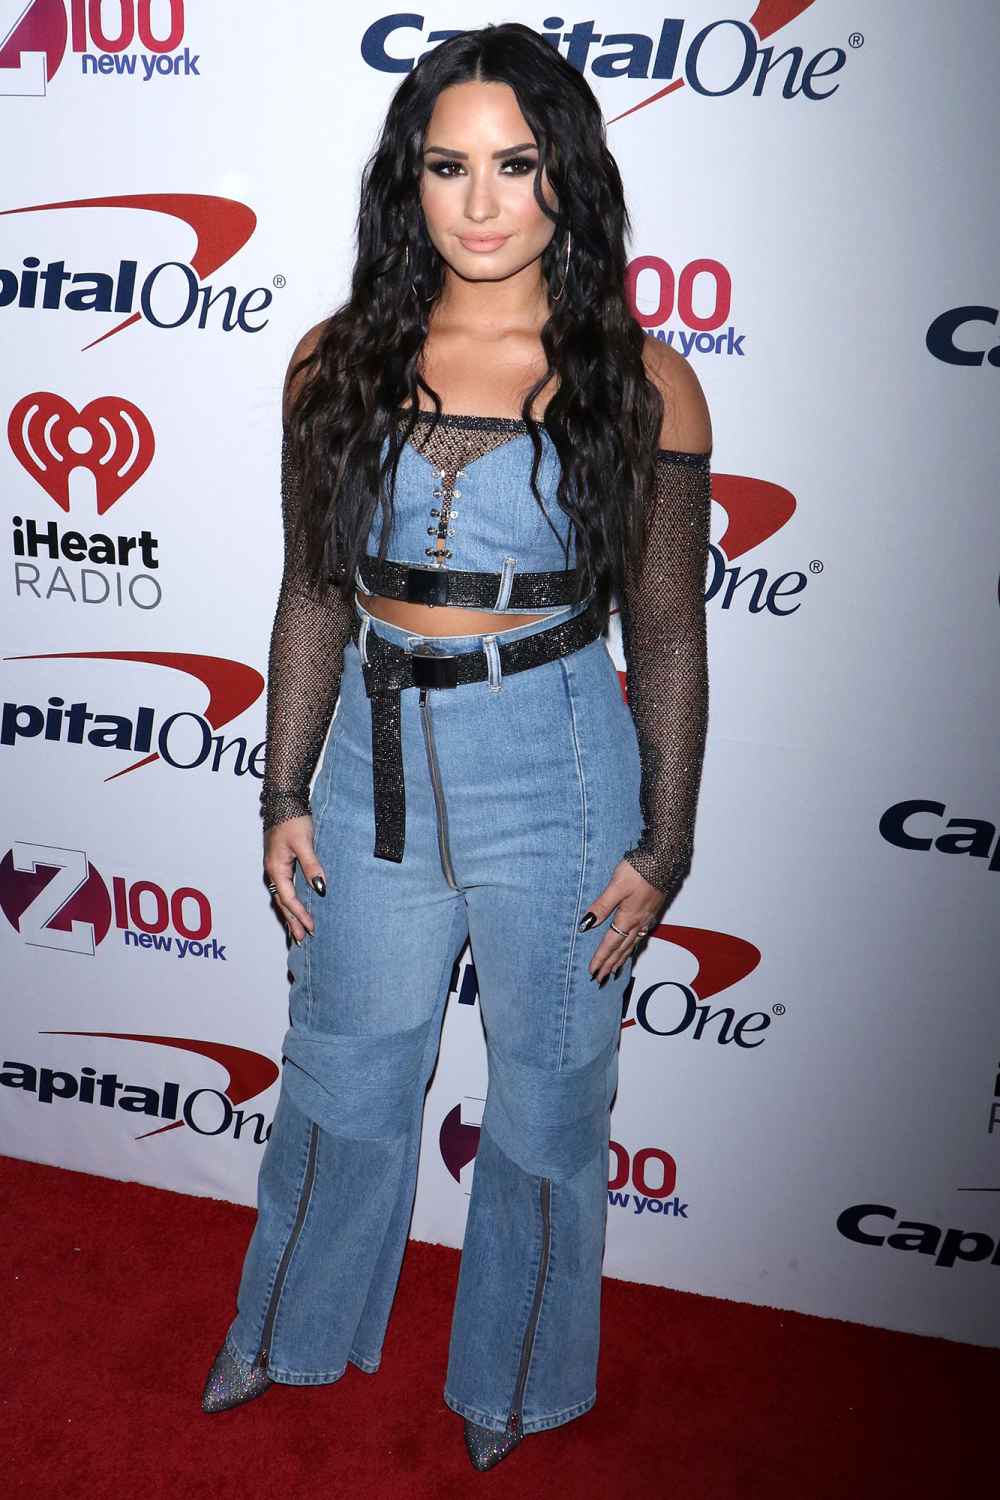 Demi Lovato Celebrates Bigger Boobs After Letting Eating Issues Go | Us ...